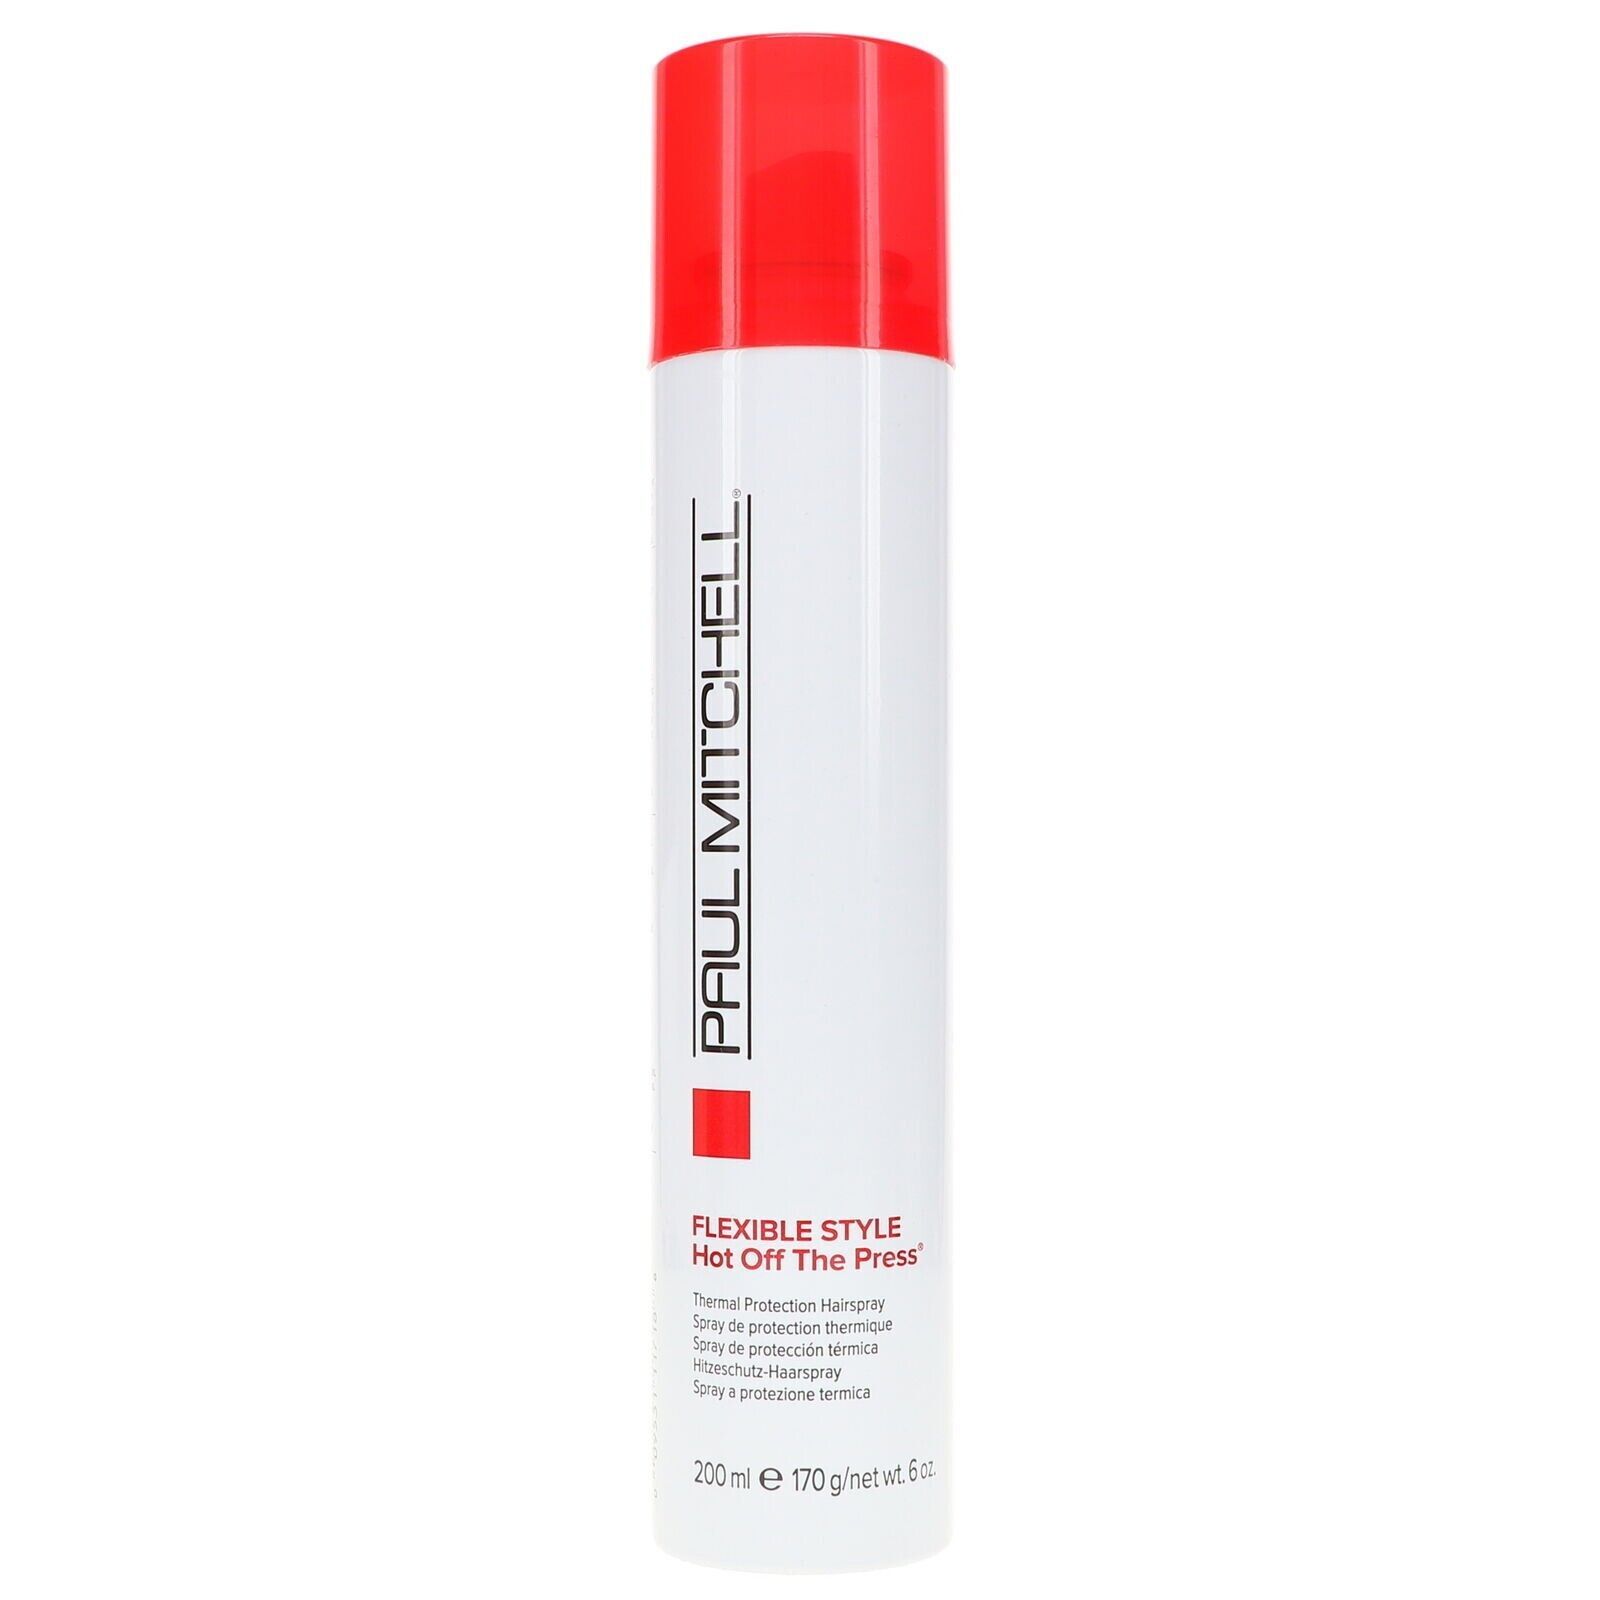 Primary image for Paul Mitchell Flexible Style Hot Off The Press 6 oz